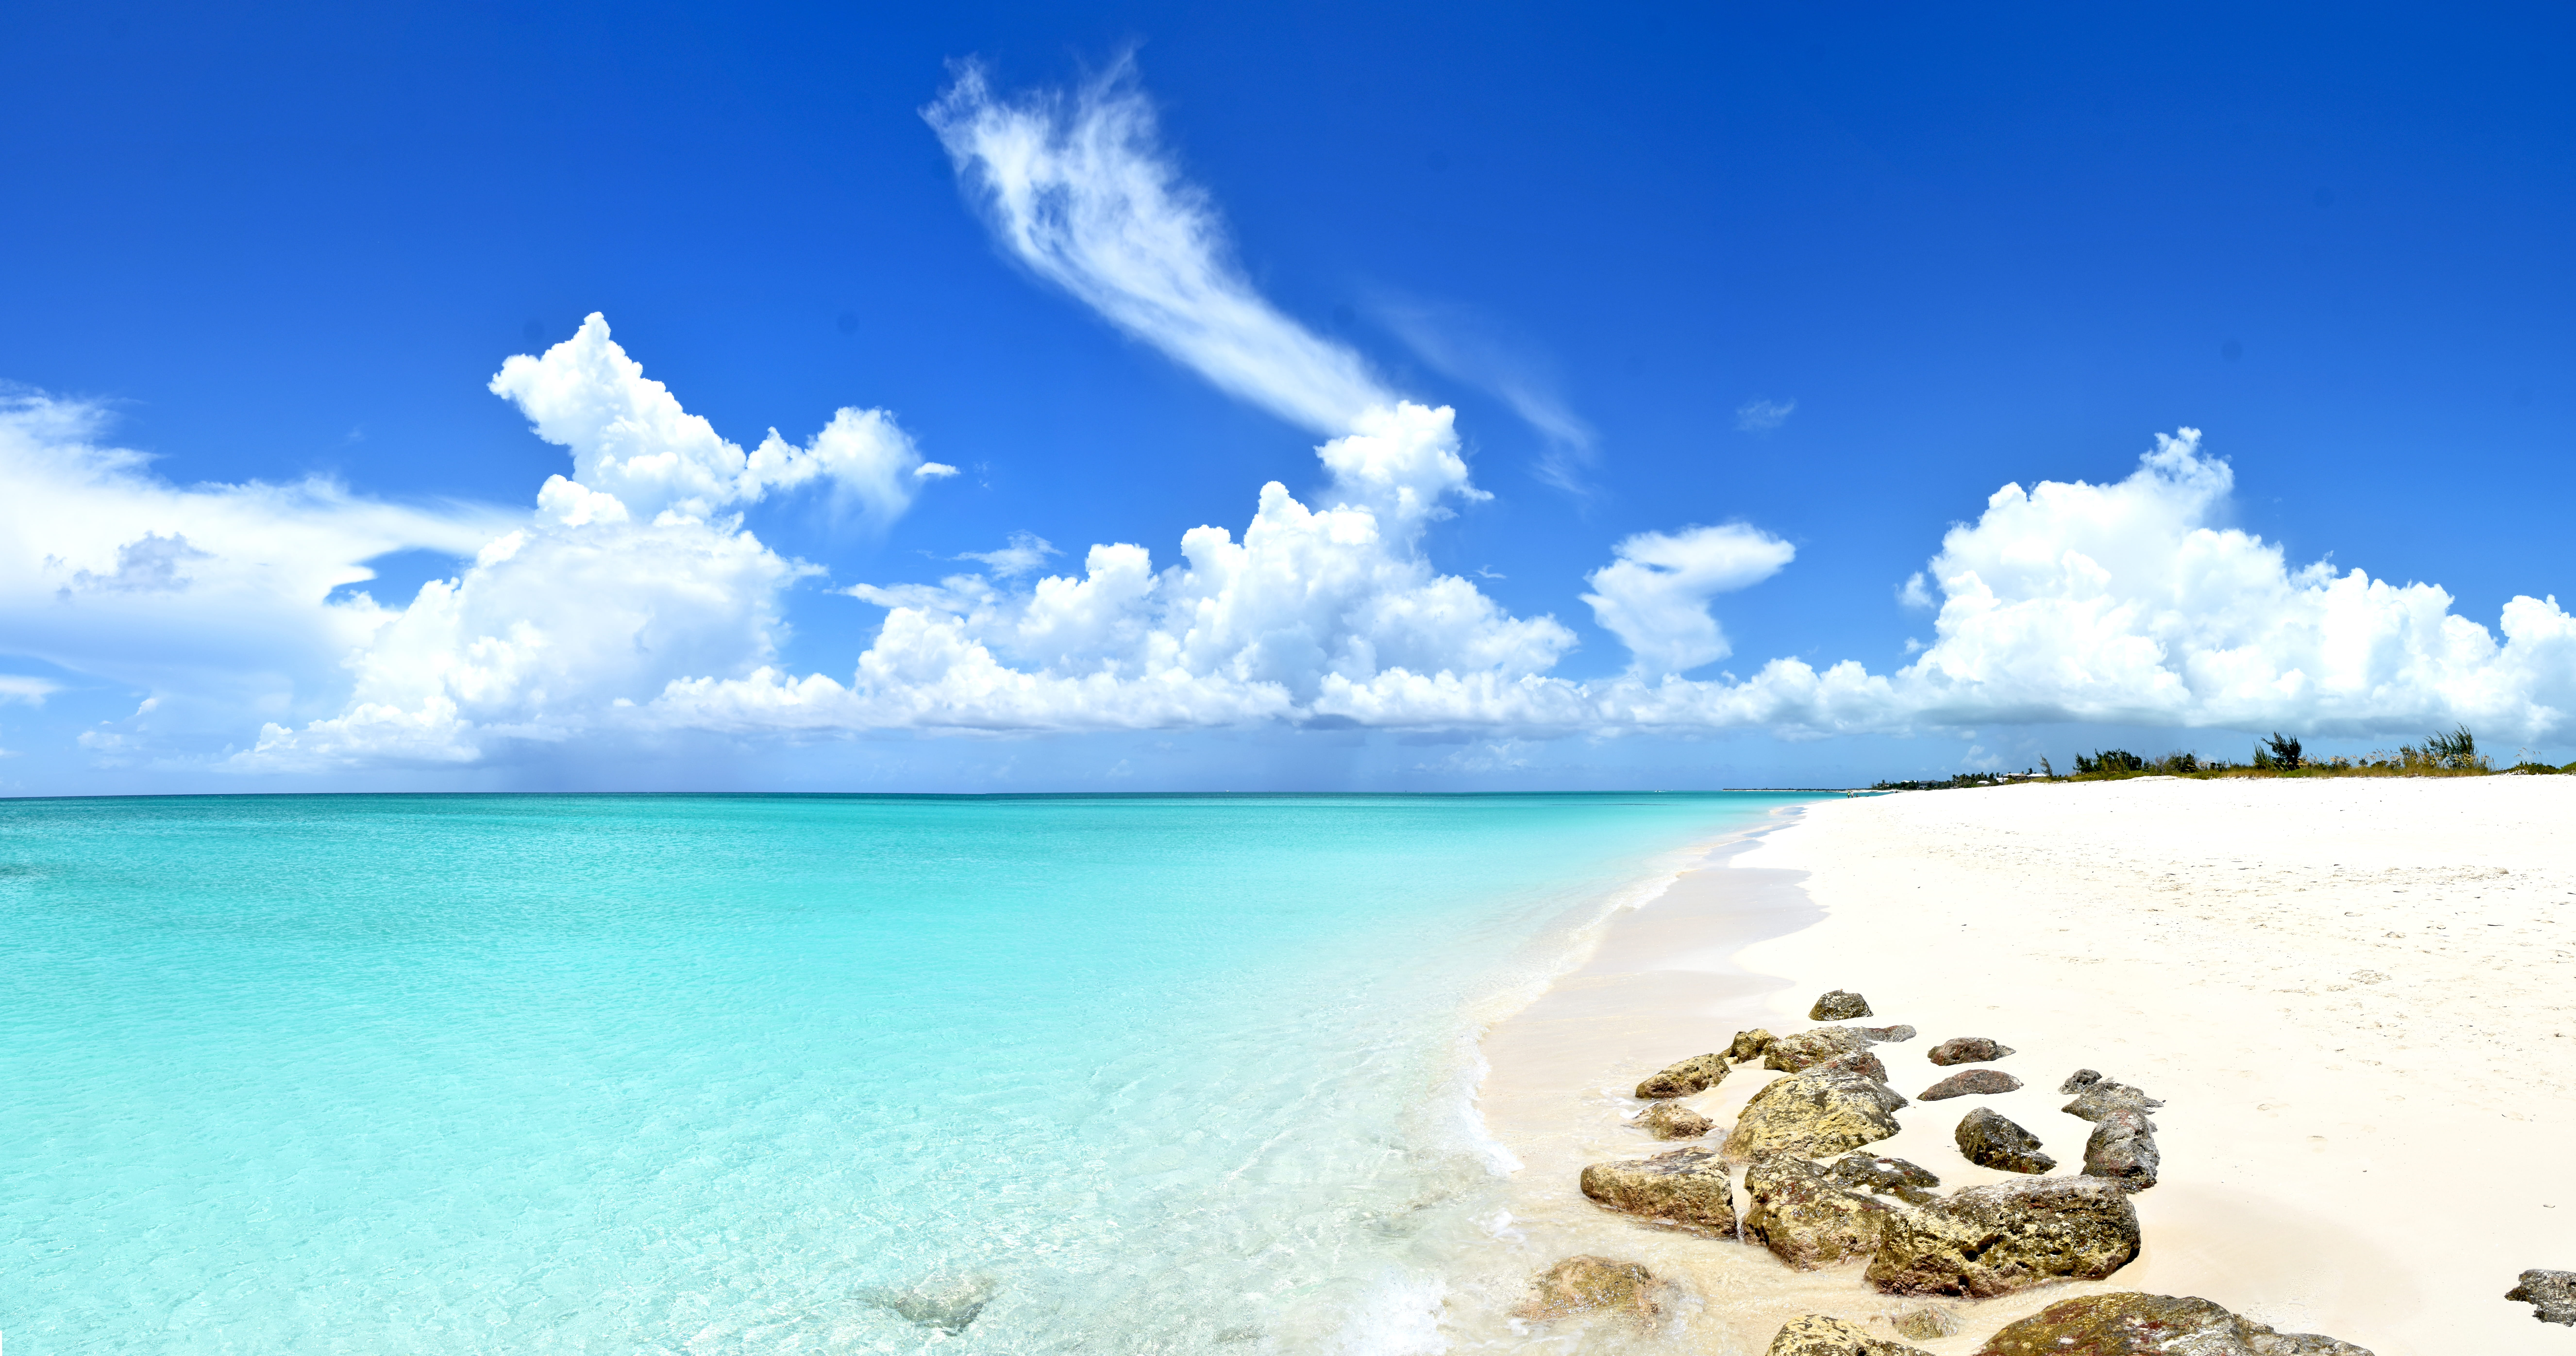 Trips in Turks and Caicos Islands